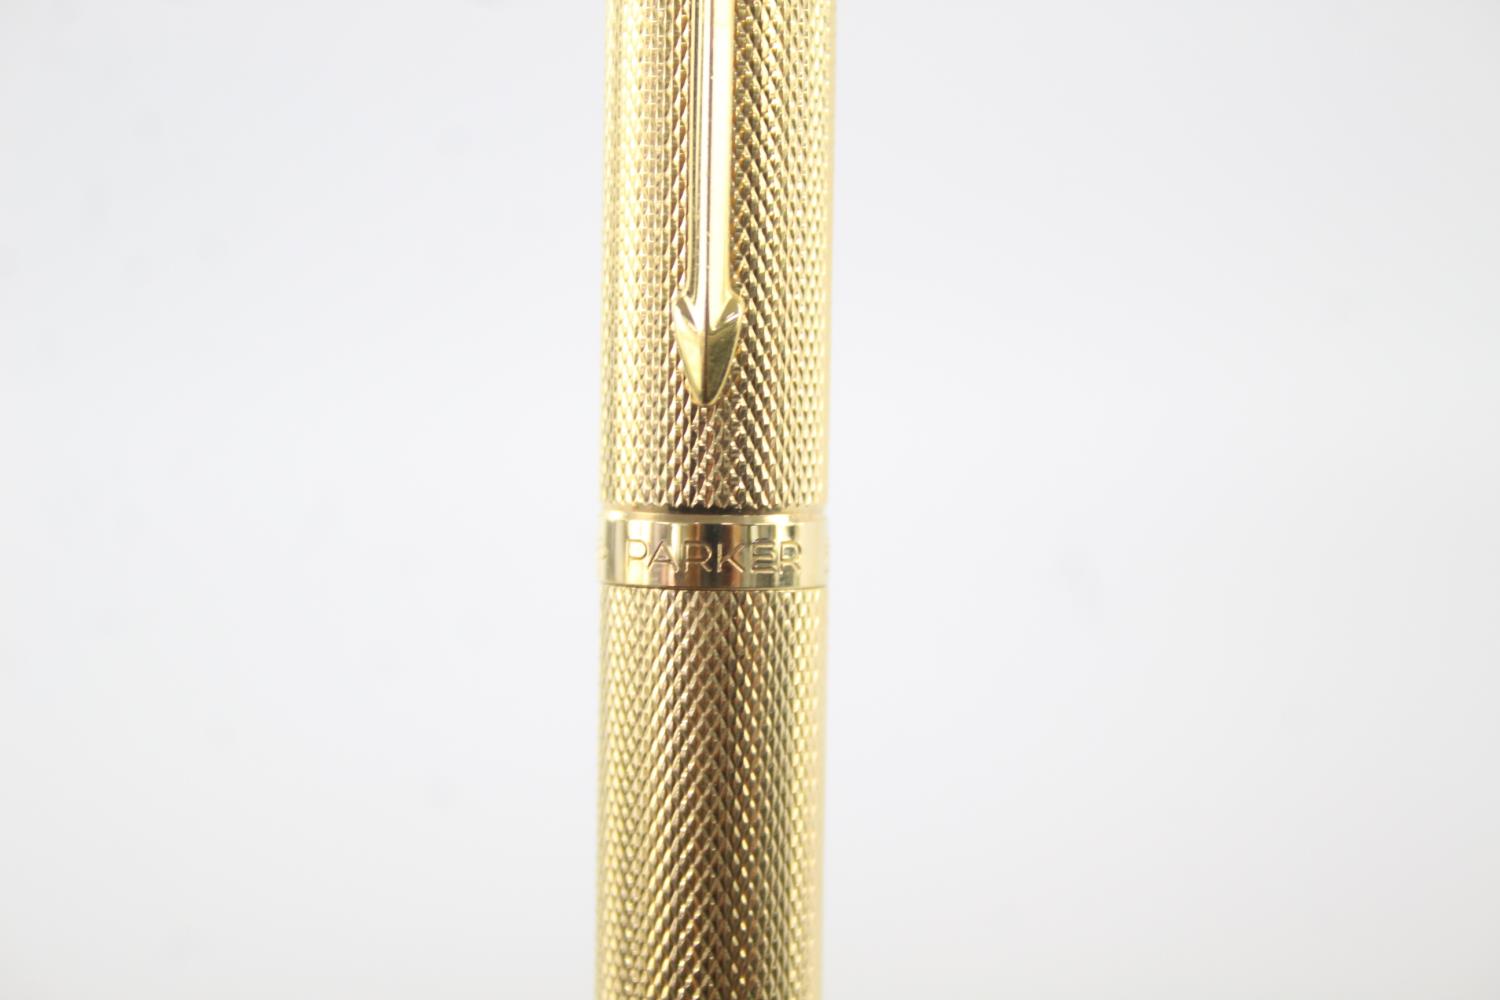 Vintage PARKER 75 Rolled Gold FOUNTAIN PEN w/ 14ct Gold Nib WRITING (26g) Vintage PARKER 75 Rolled - Image 6 of 7